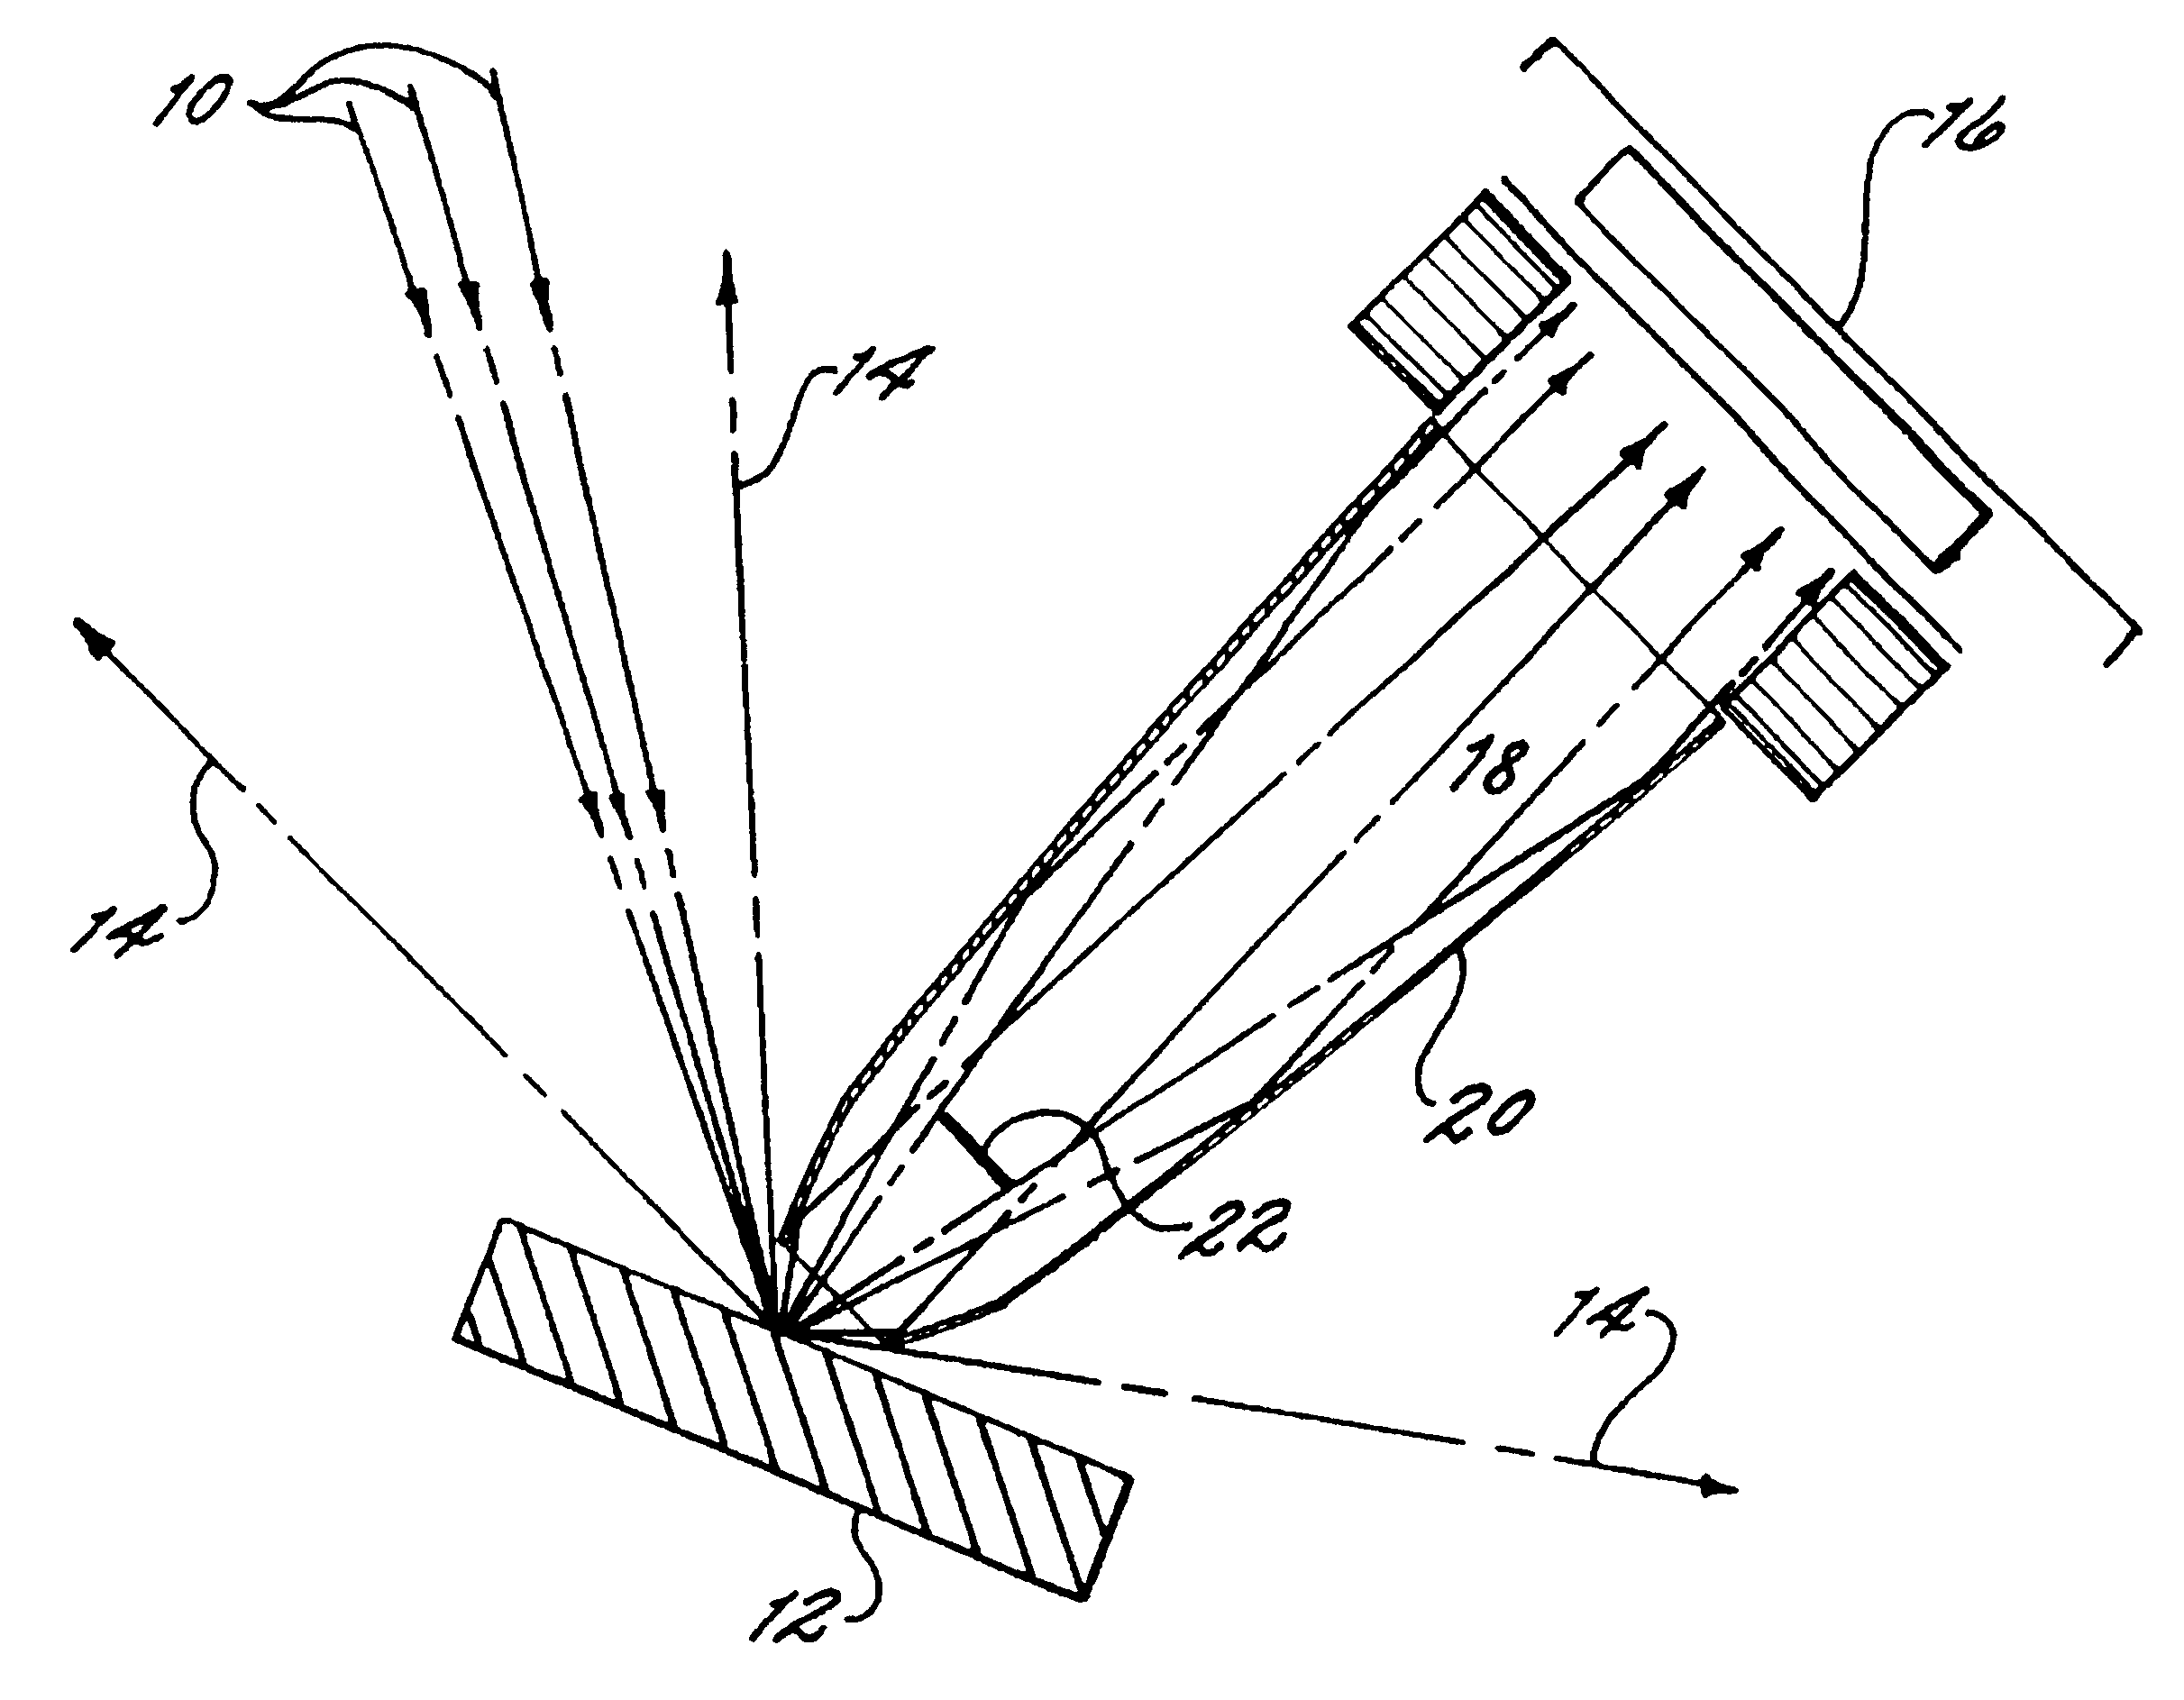 Apparatus and method for improved energy dispersive X-ray spectrometer